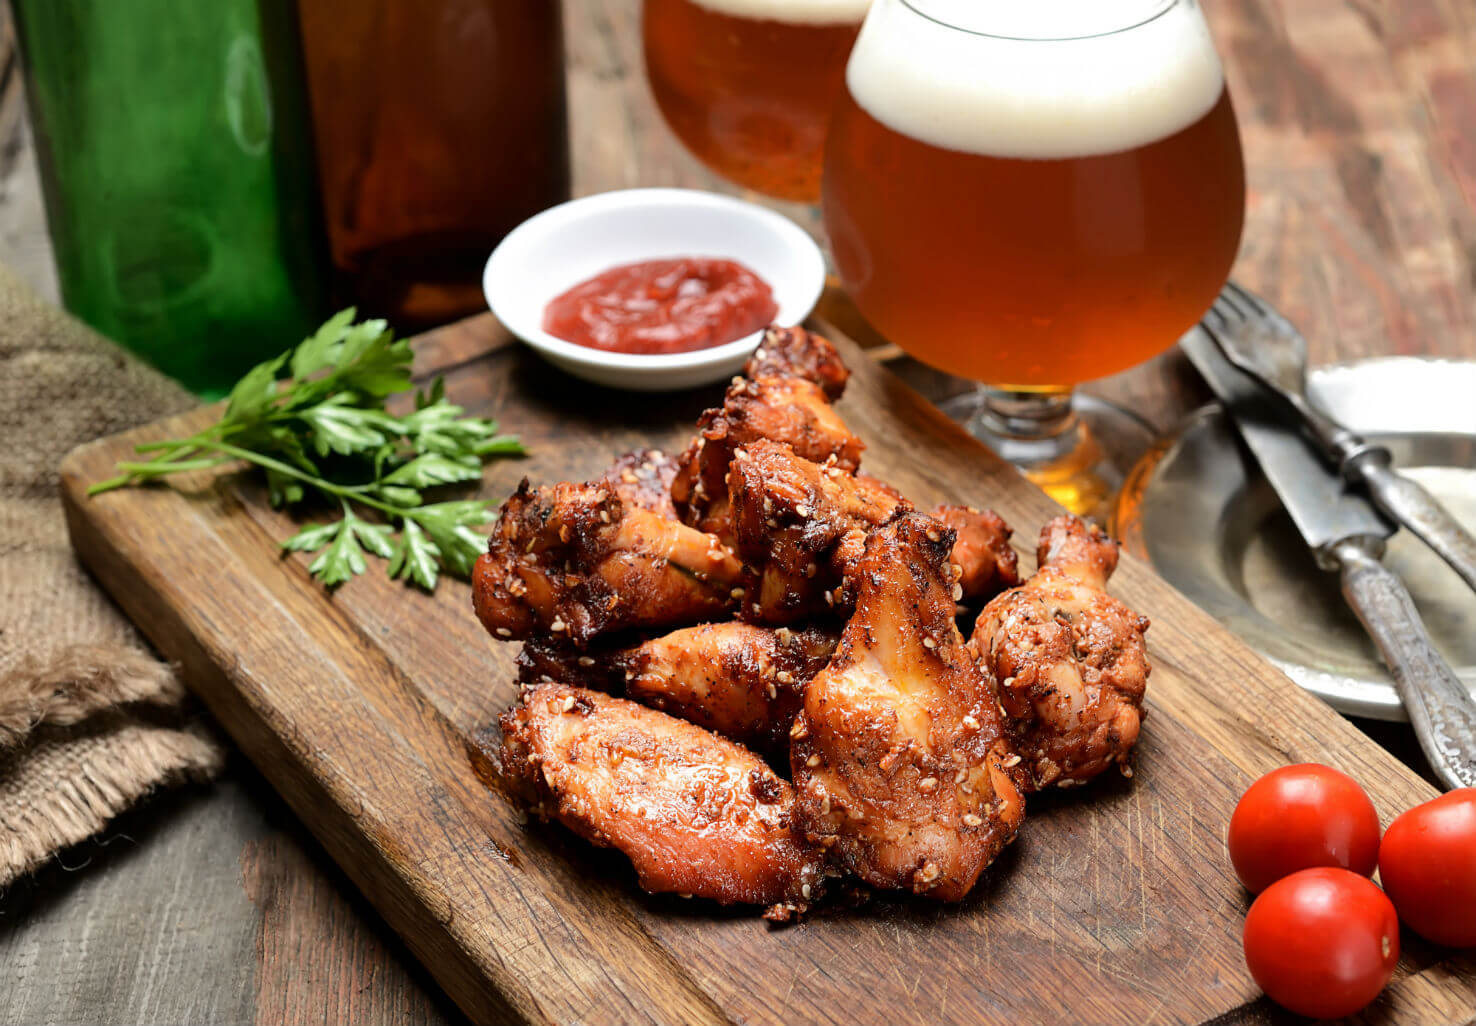 Artisan hot wings on plate with sauces and beer